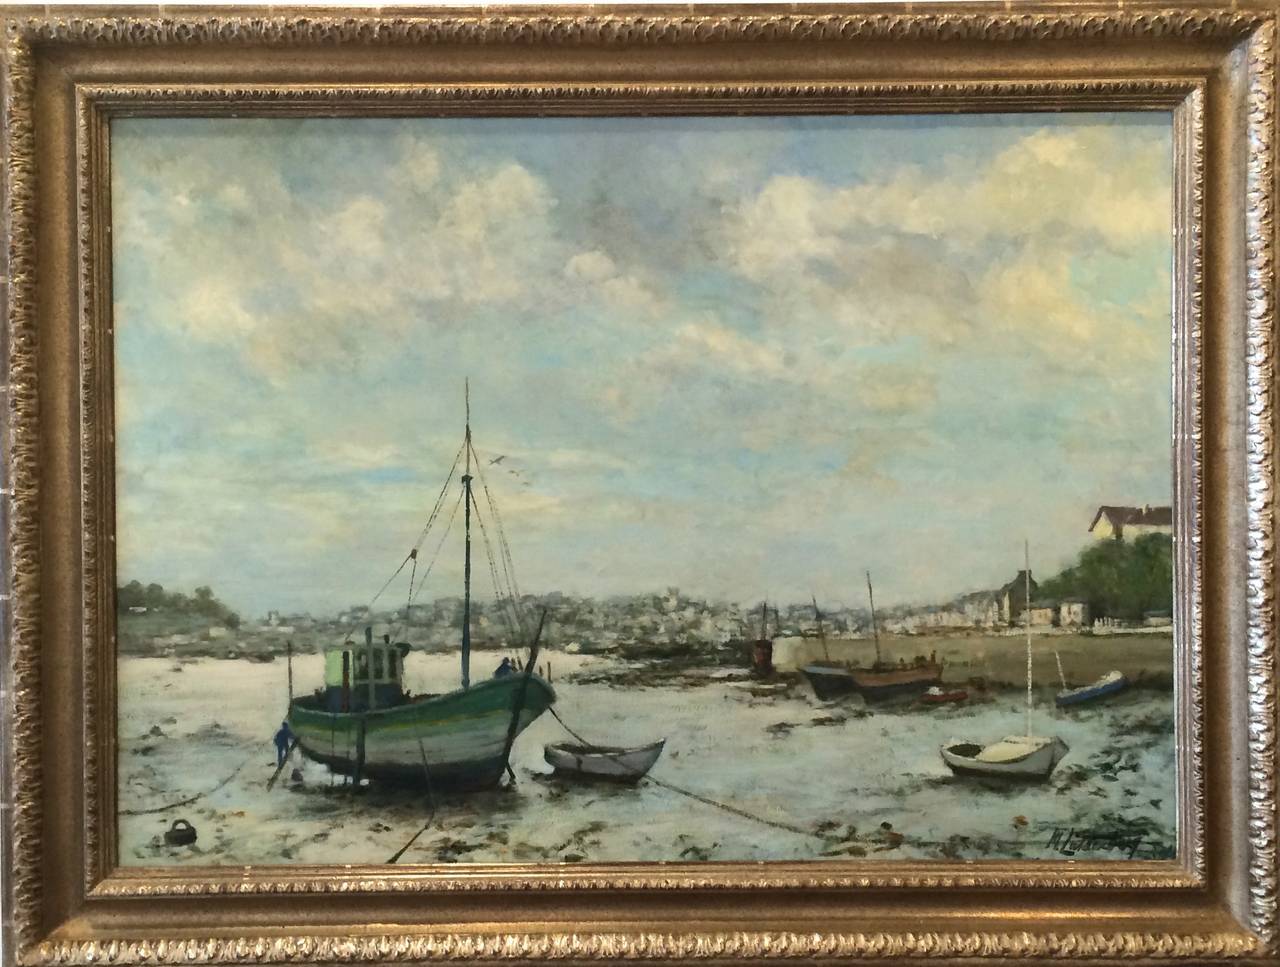 Boats in dry dock - Painting by Menes Lichtenberg